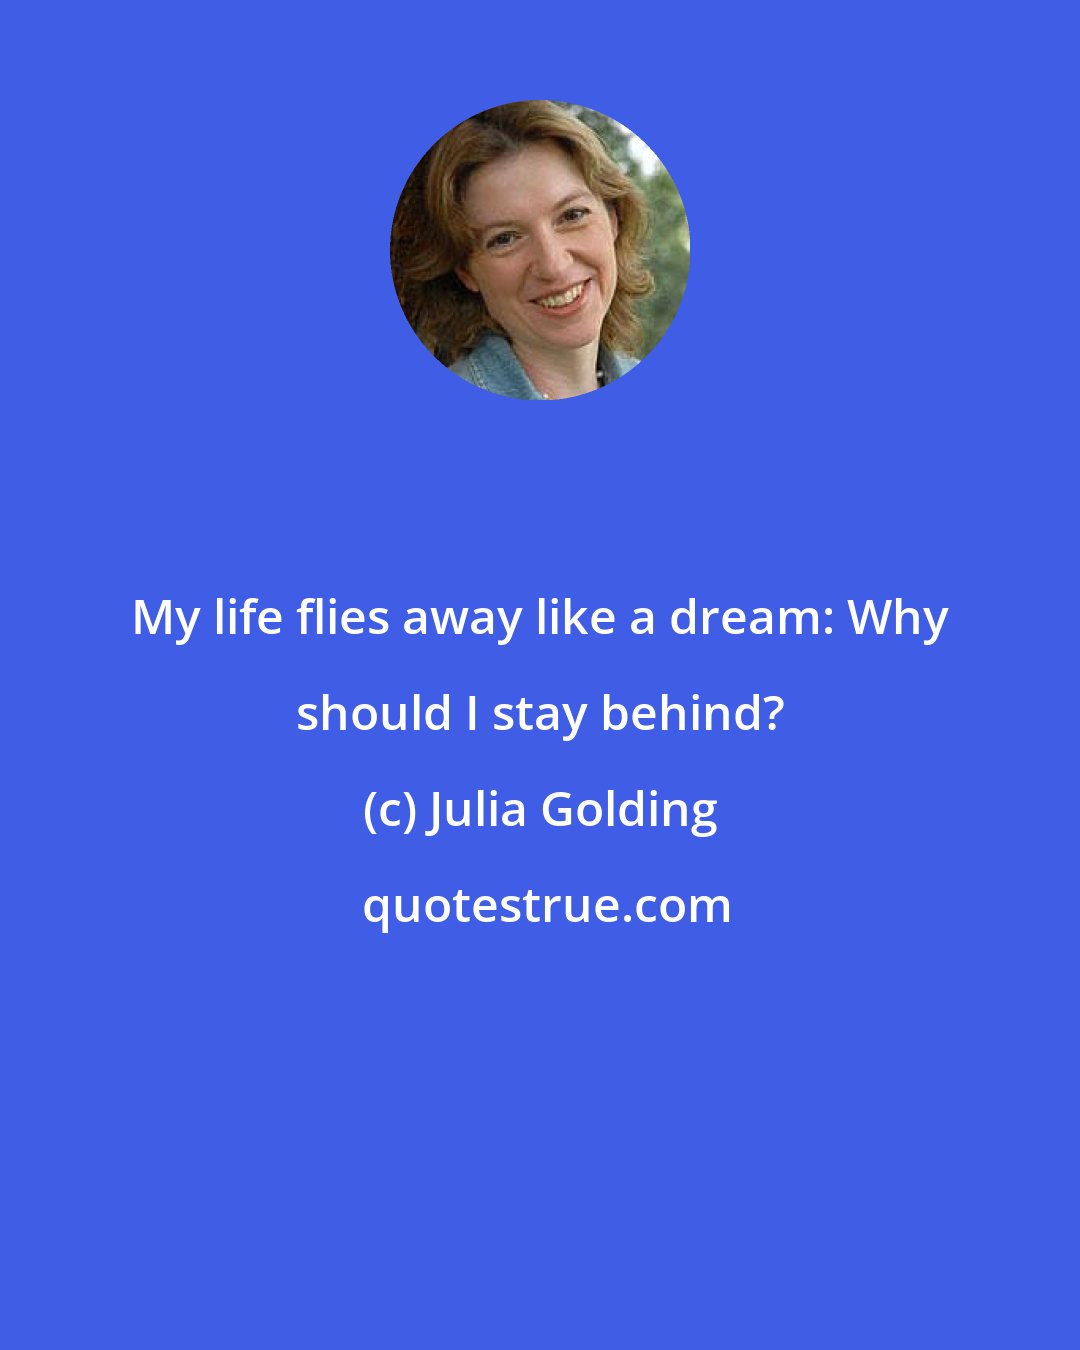 Julia Golding: My life flies away like a dream: Why should I stay behind?